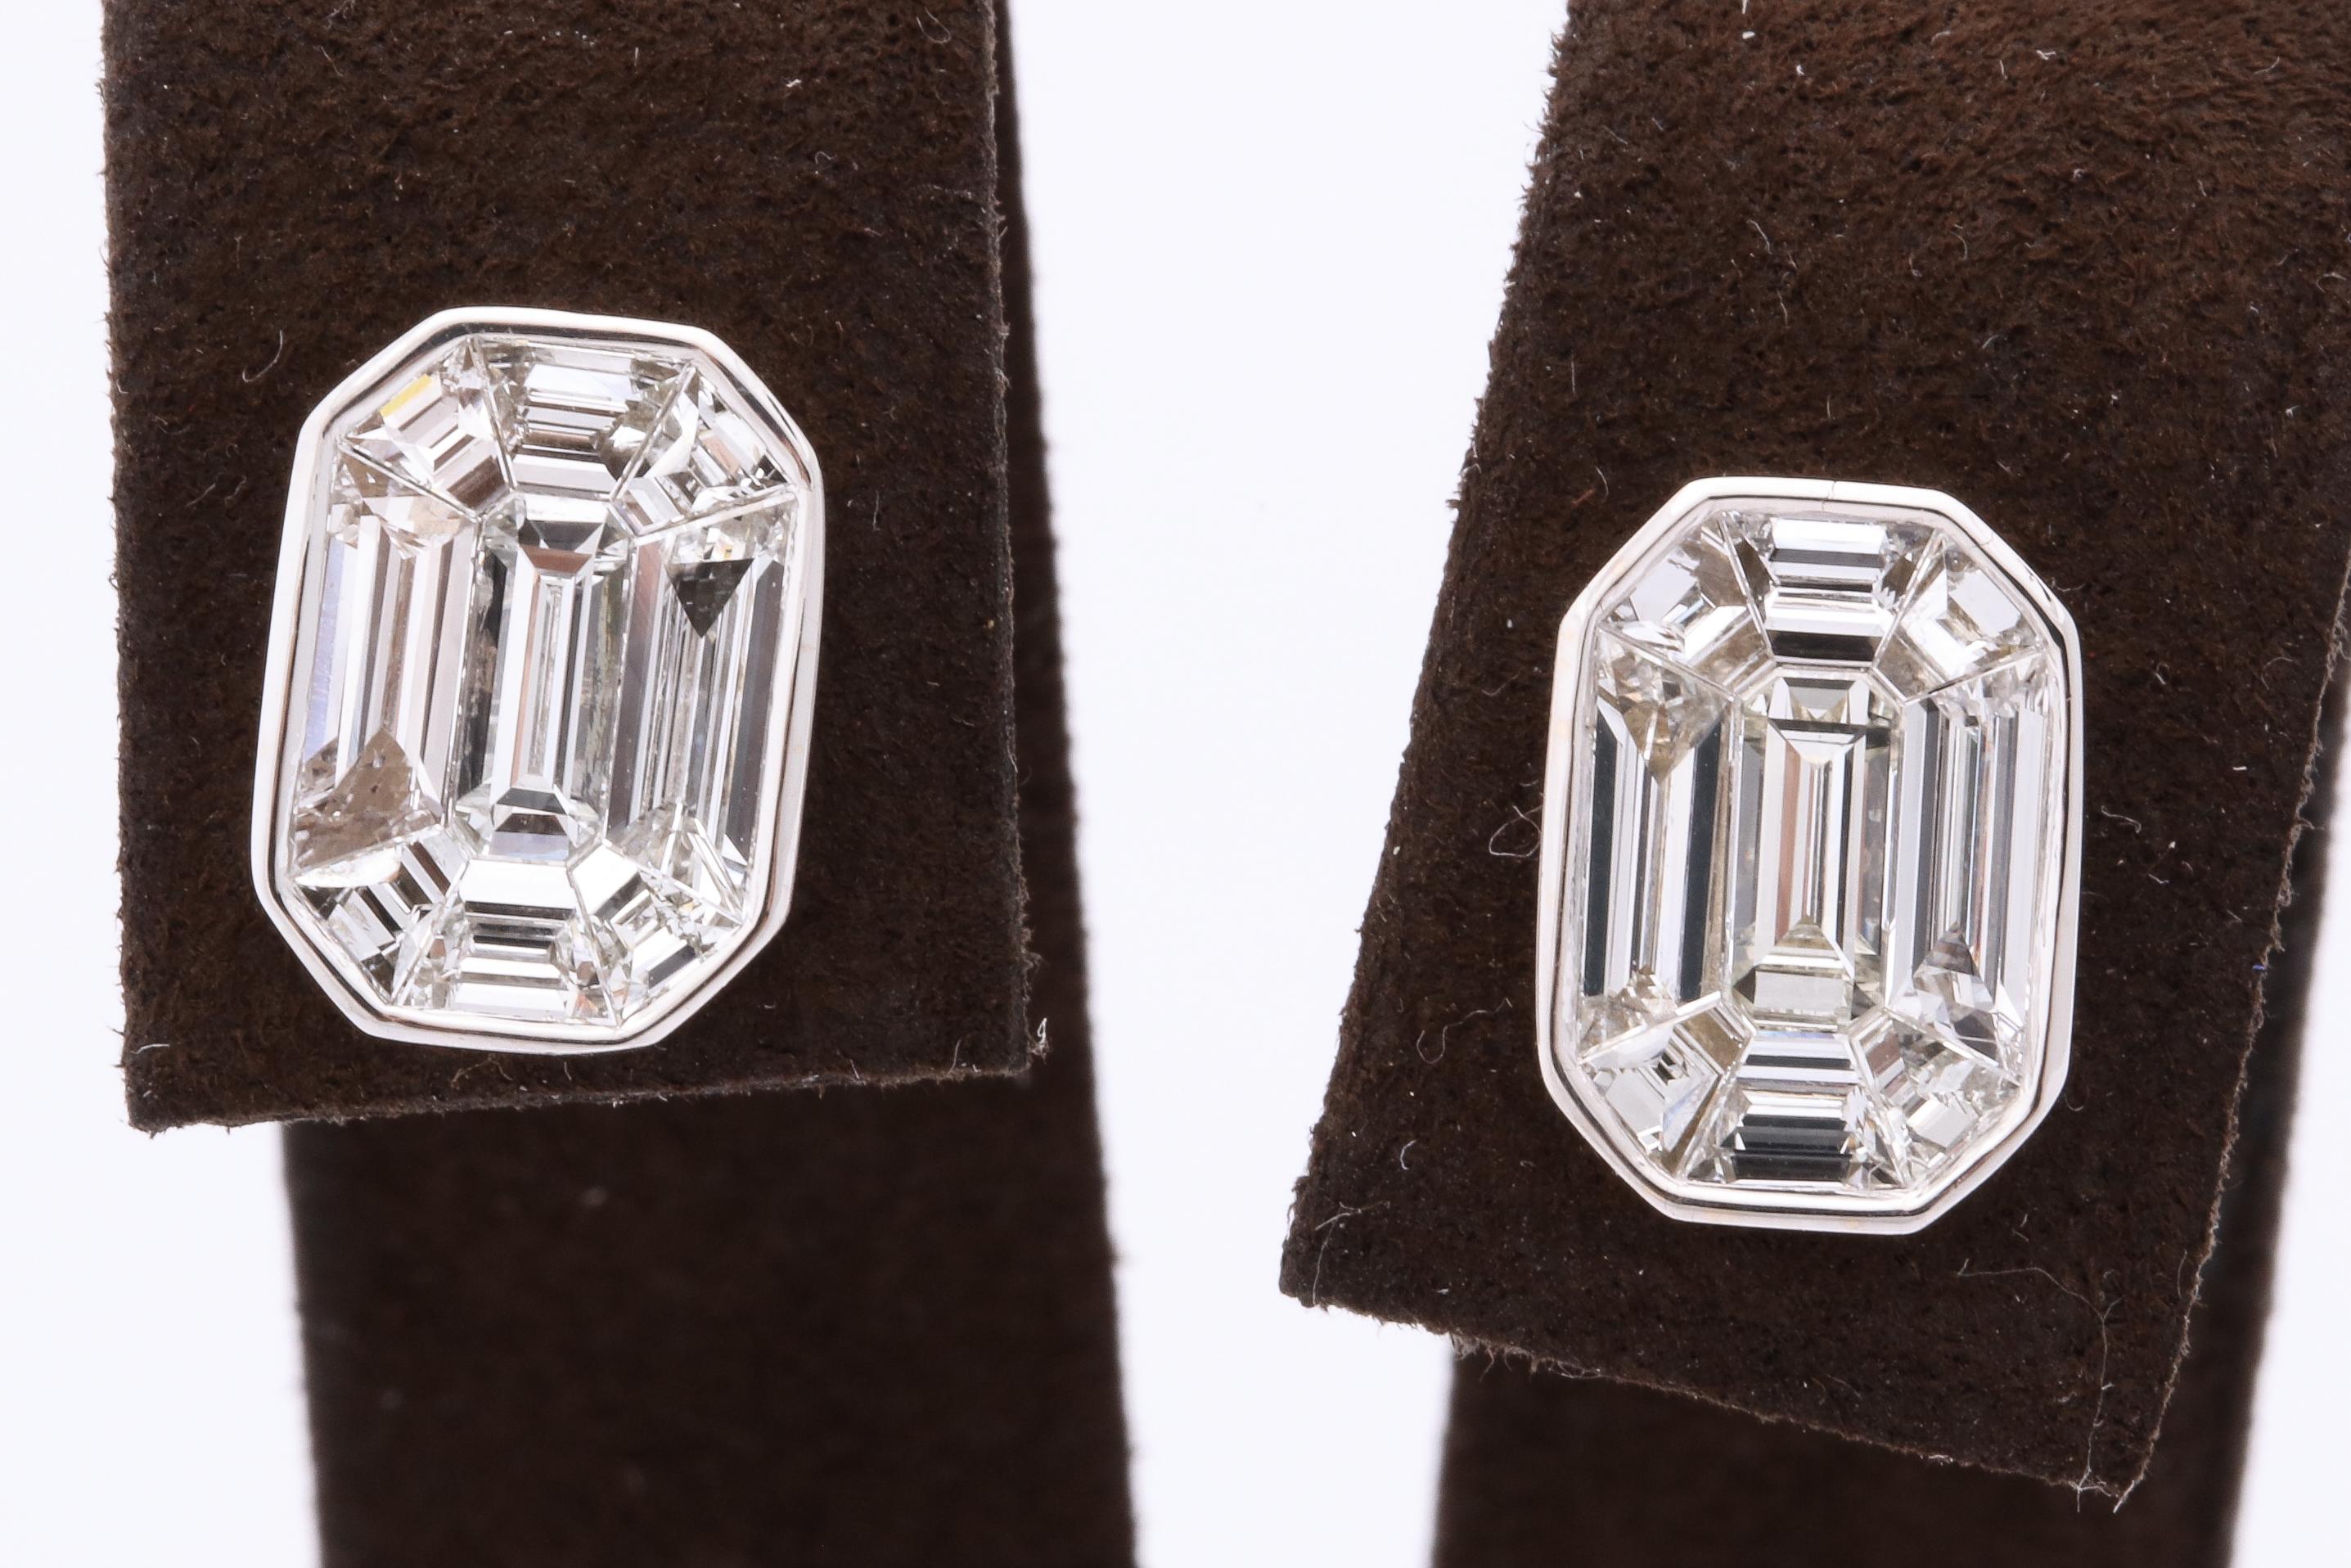 
An incredible pair of diamond studs!

3.33 carats of illusion set, special cut white diamonds set as an emerald cut. 

The studs look like they are over 5 carats each!!

18k white gold 

They measure 11.6 mm x 9.1 mm approximately. 

A FABULOUS